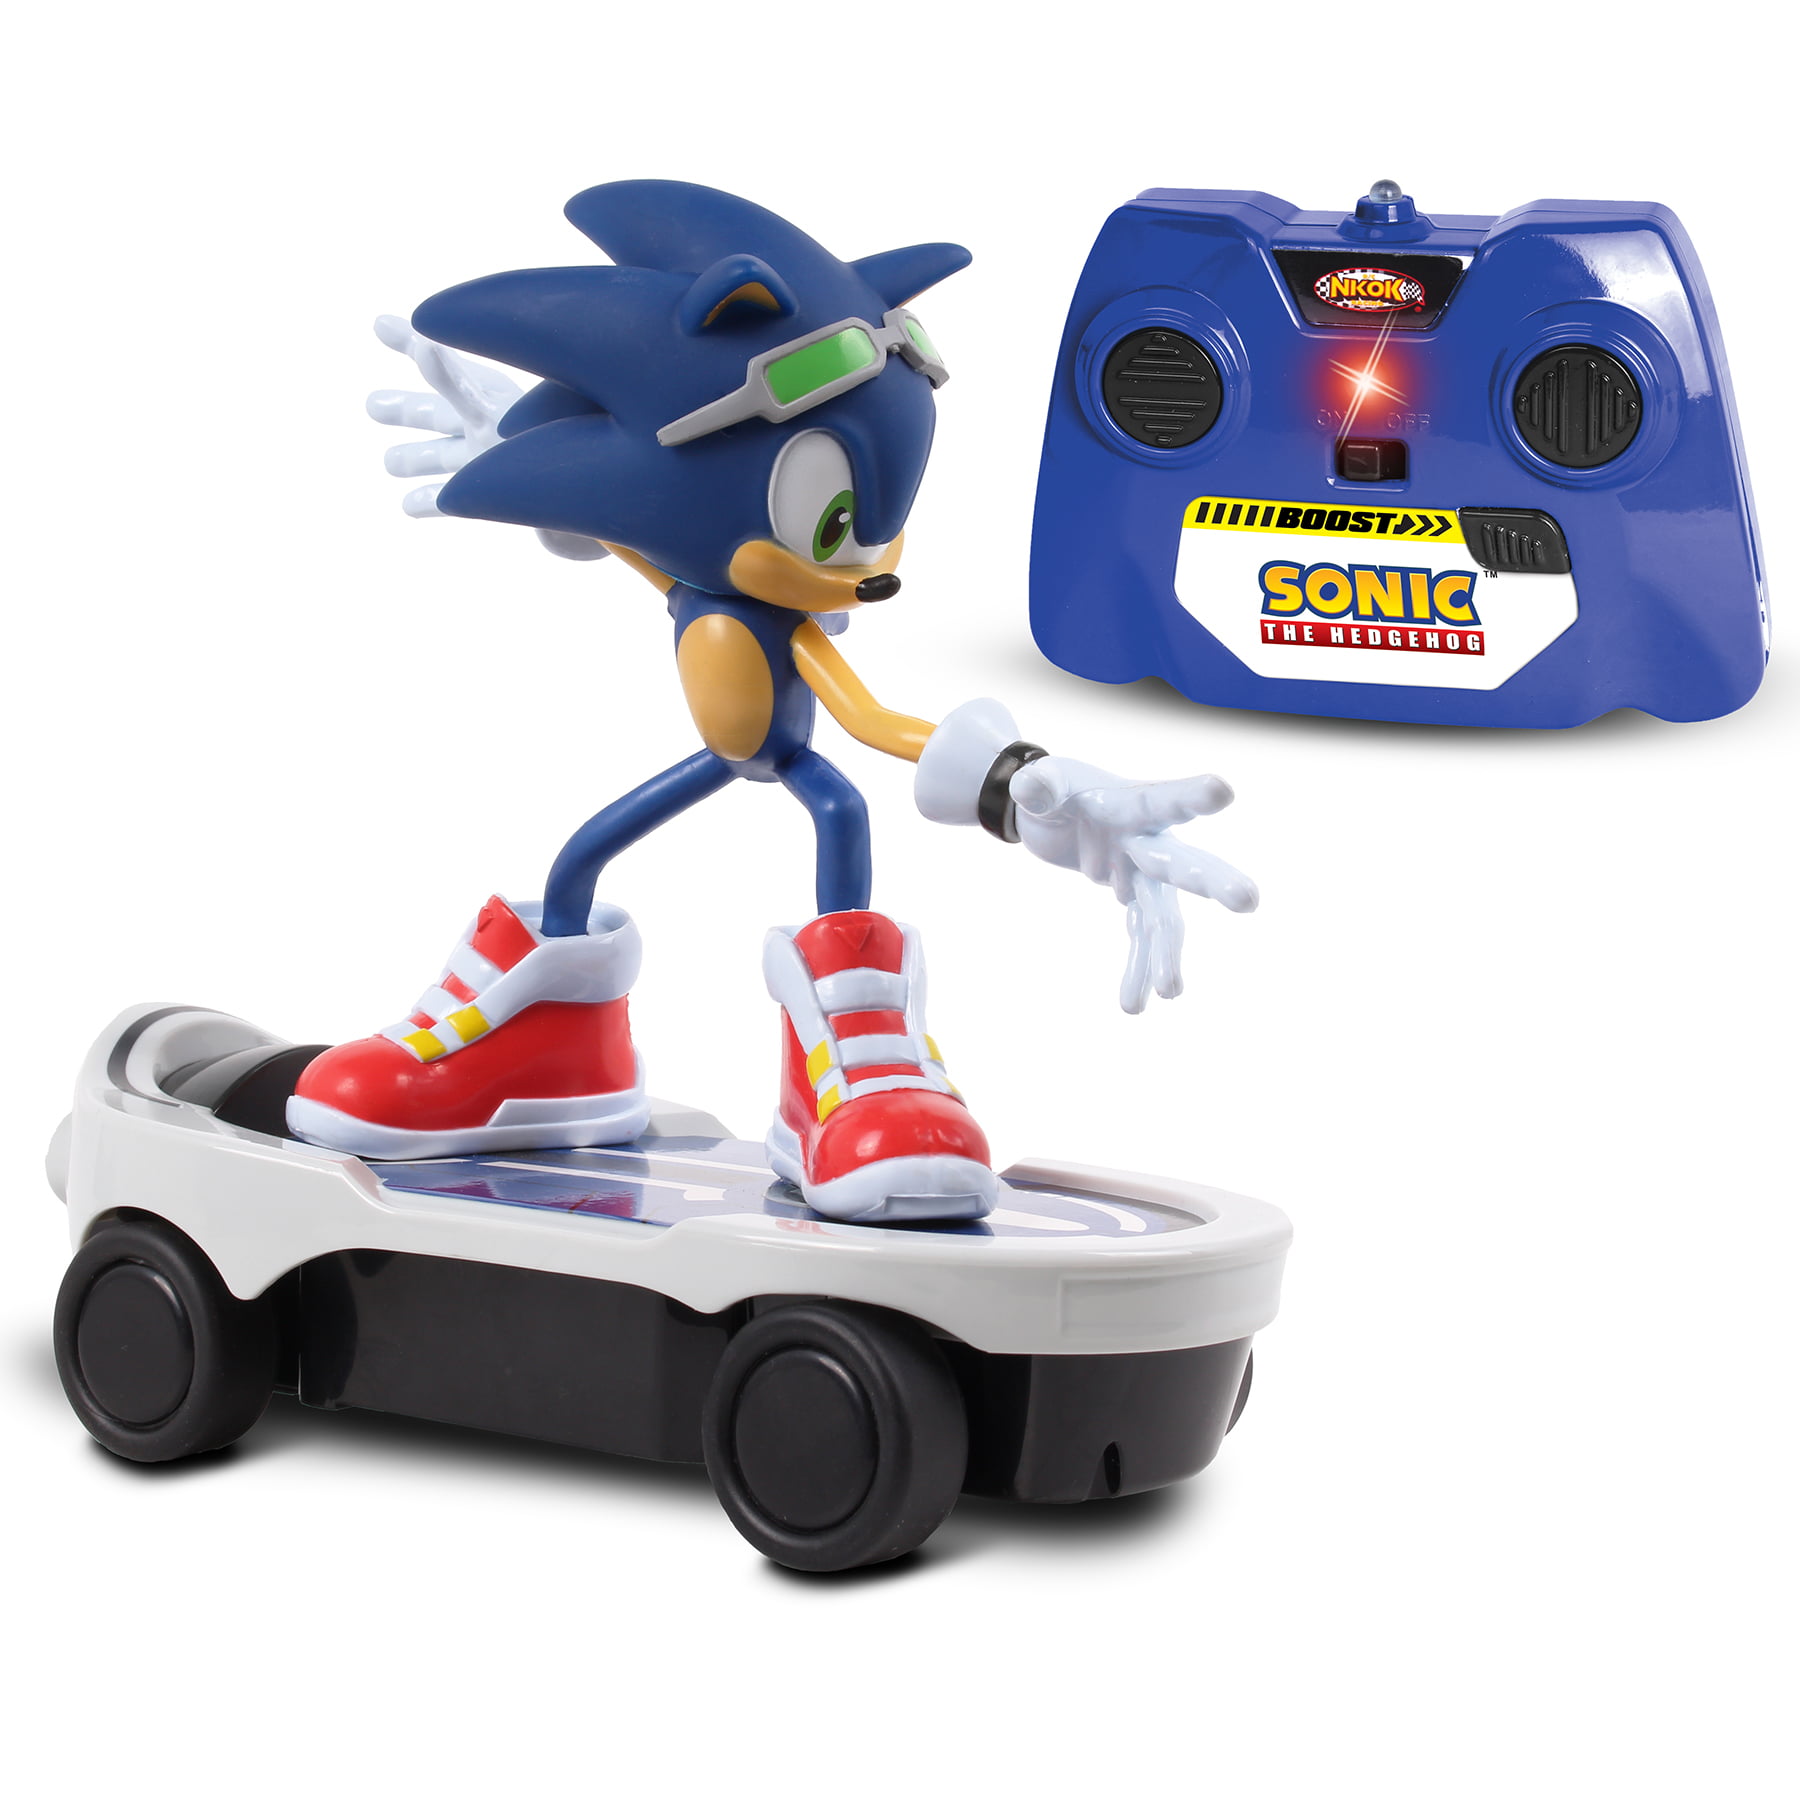 NKOK Remote Control Sonic The Hedgehog Skateboard Kids RC Racing Play Gift Toy 